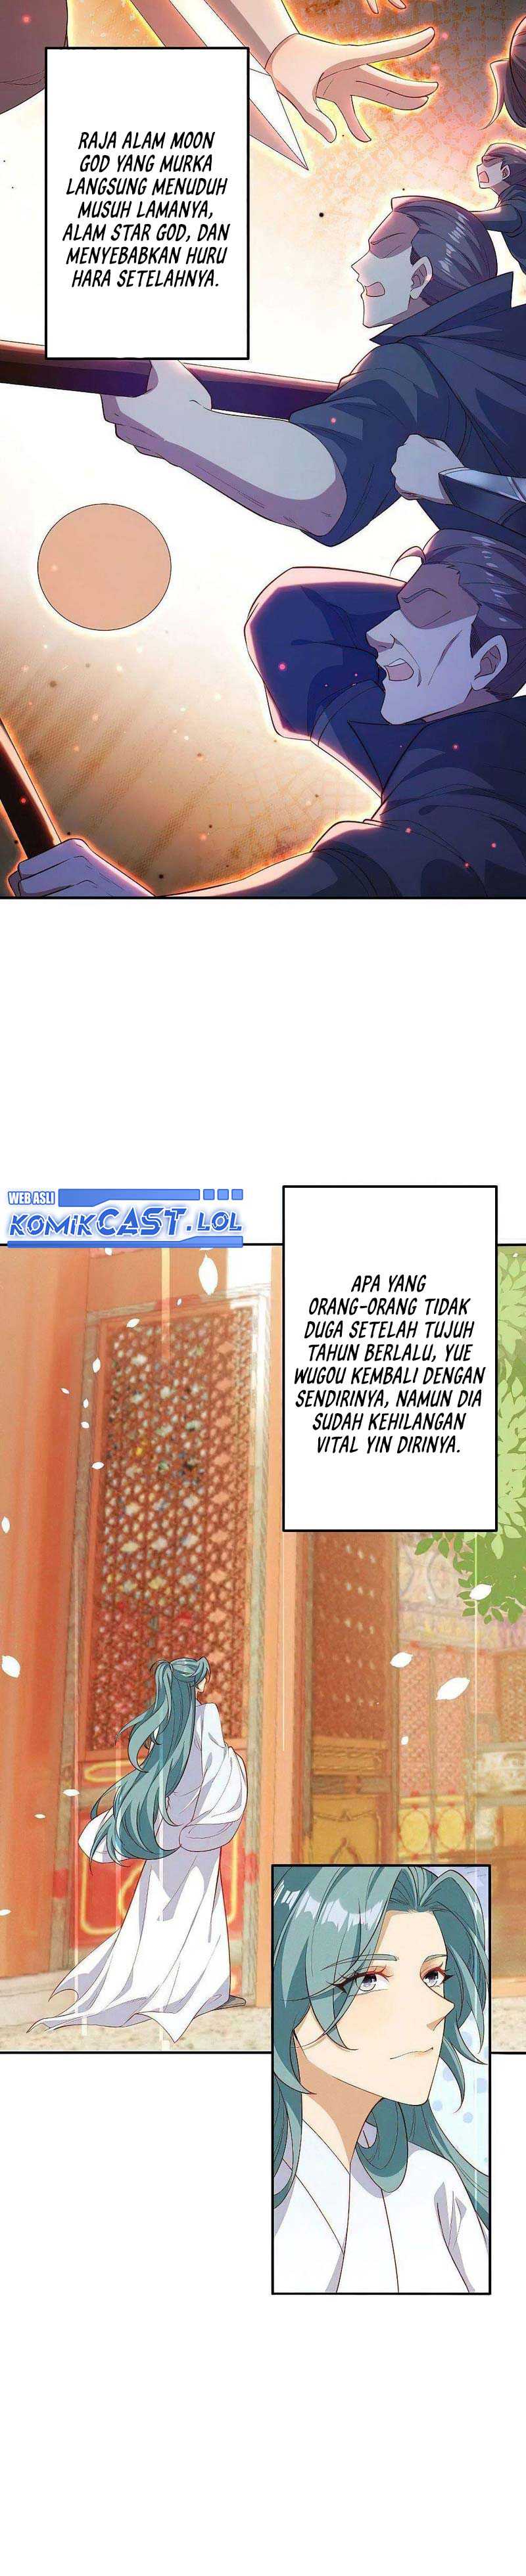 Against the Gods Chapter 581